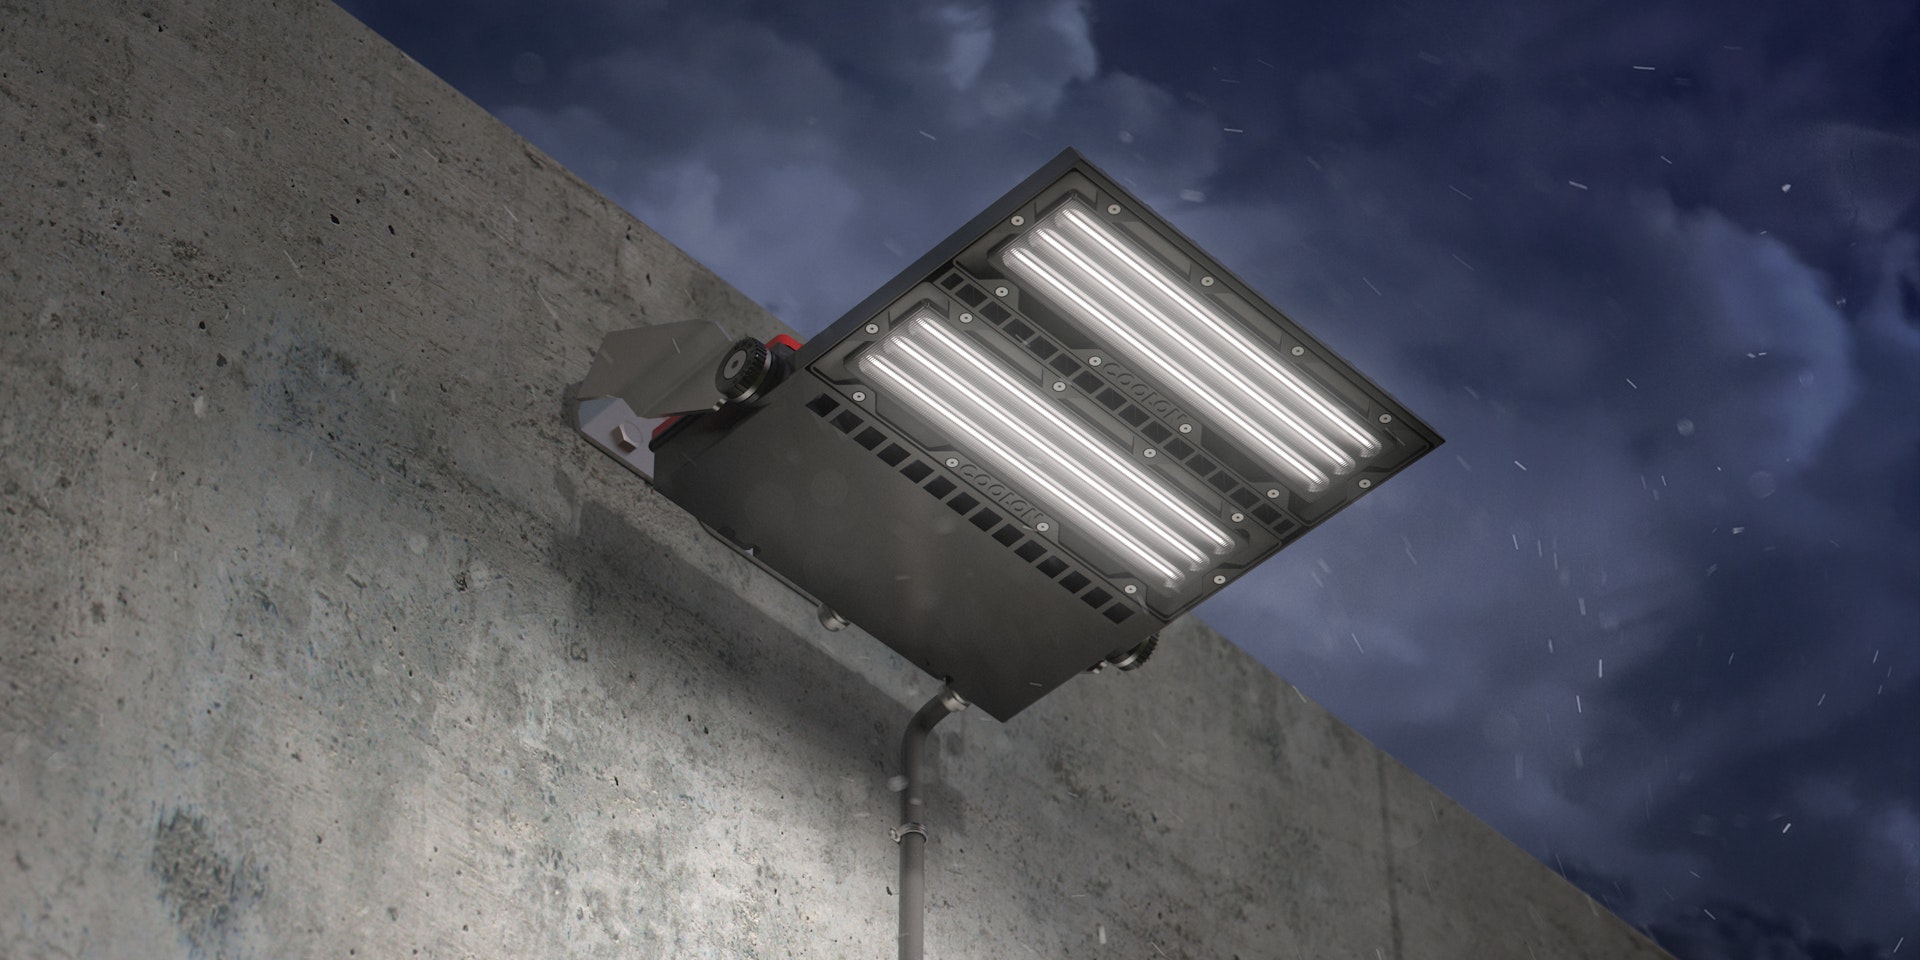 Butch LED Floodlight in application, installed on a mining/industrial site